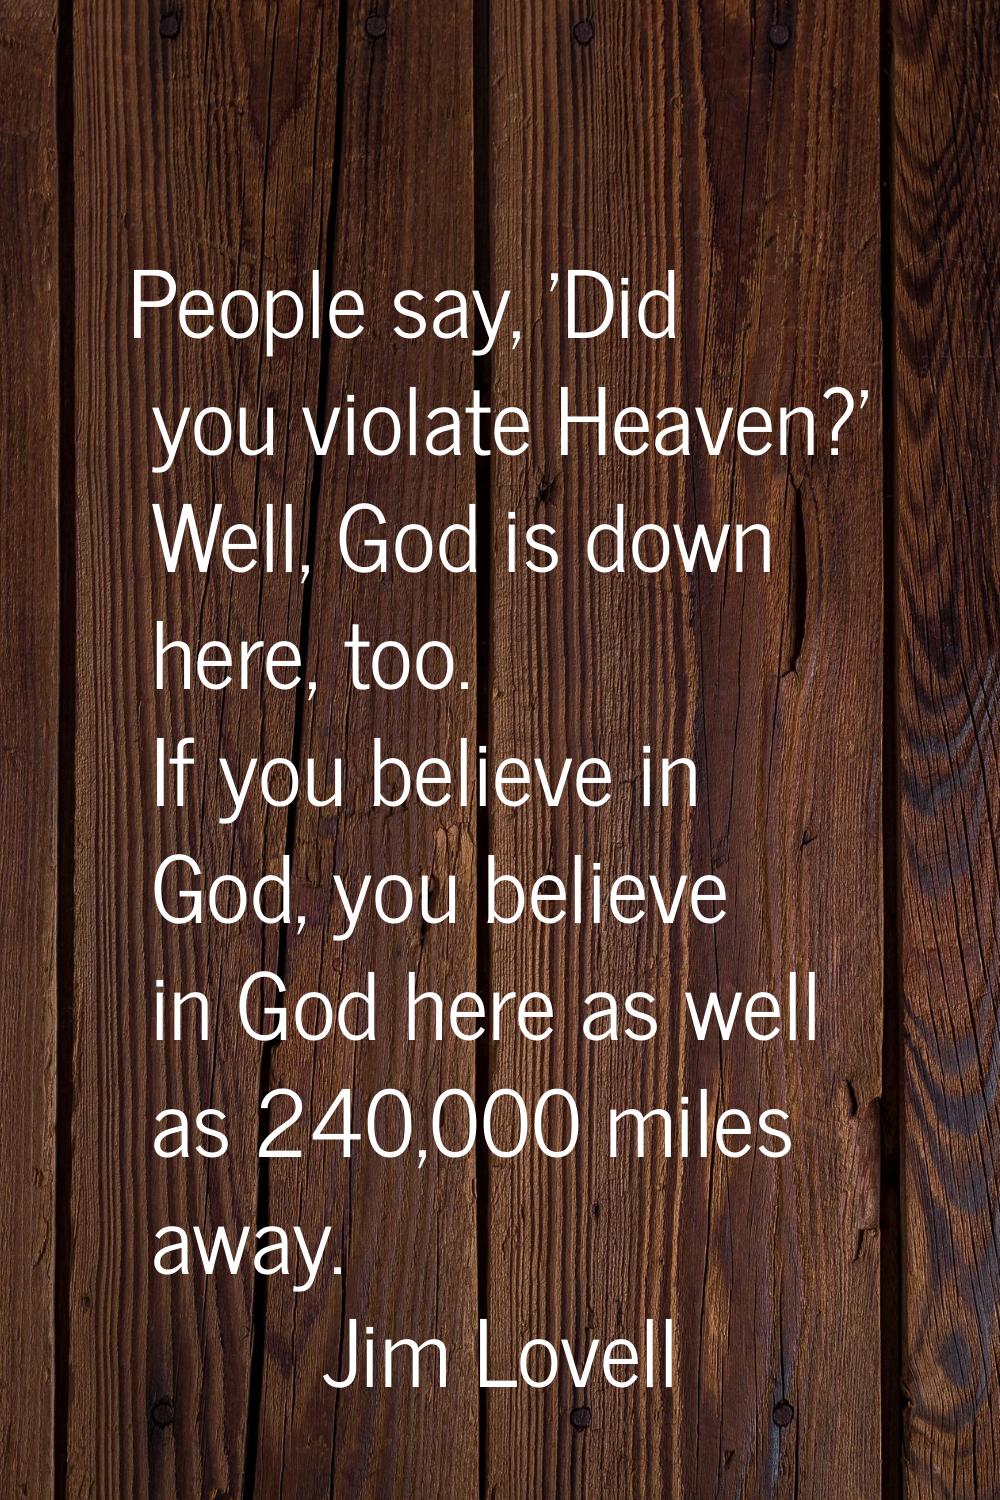 People say, 'Did you violate Heaven?' Well, God is down here, too. If you believe in God, you belie